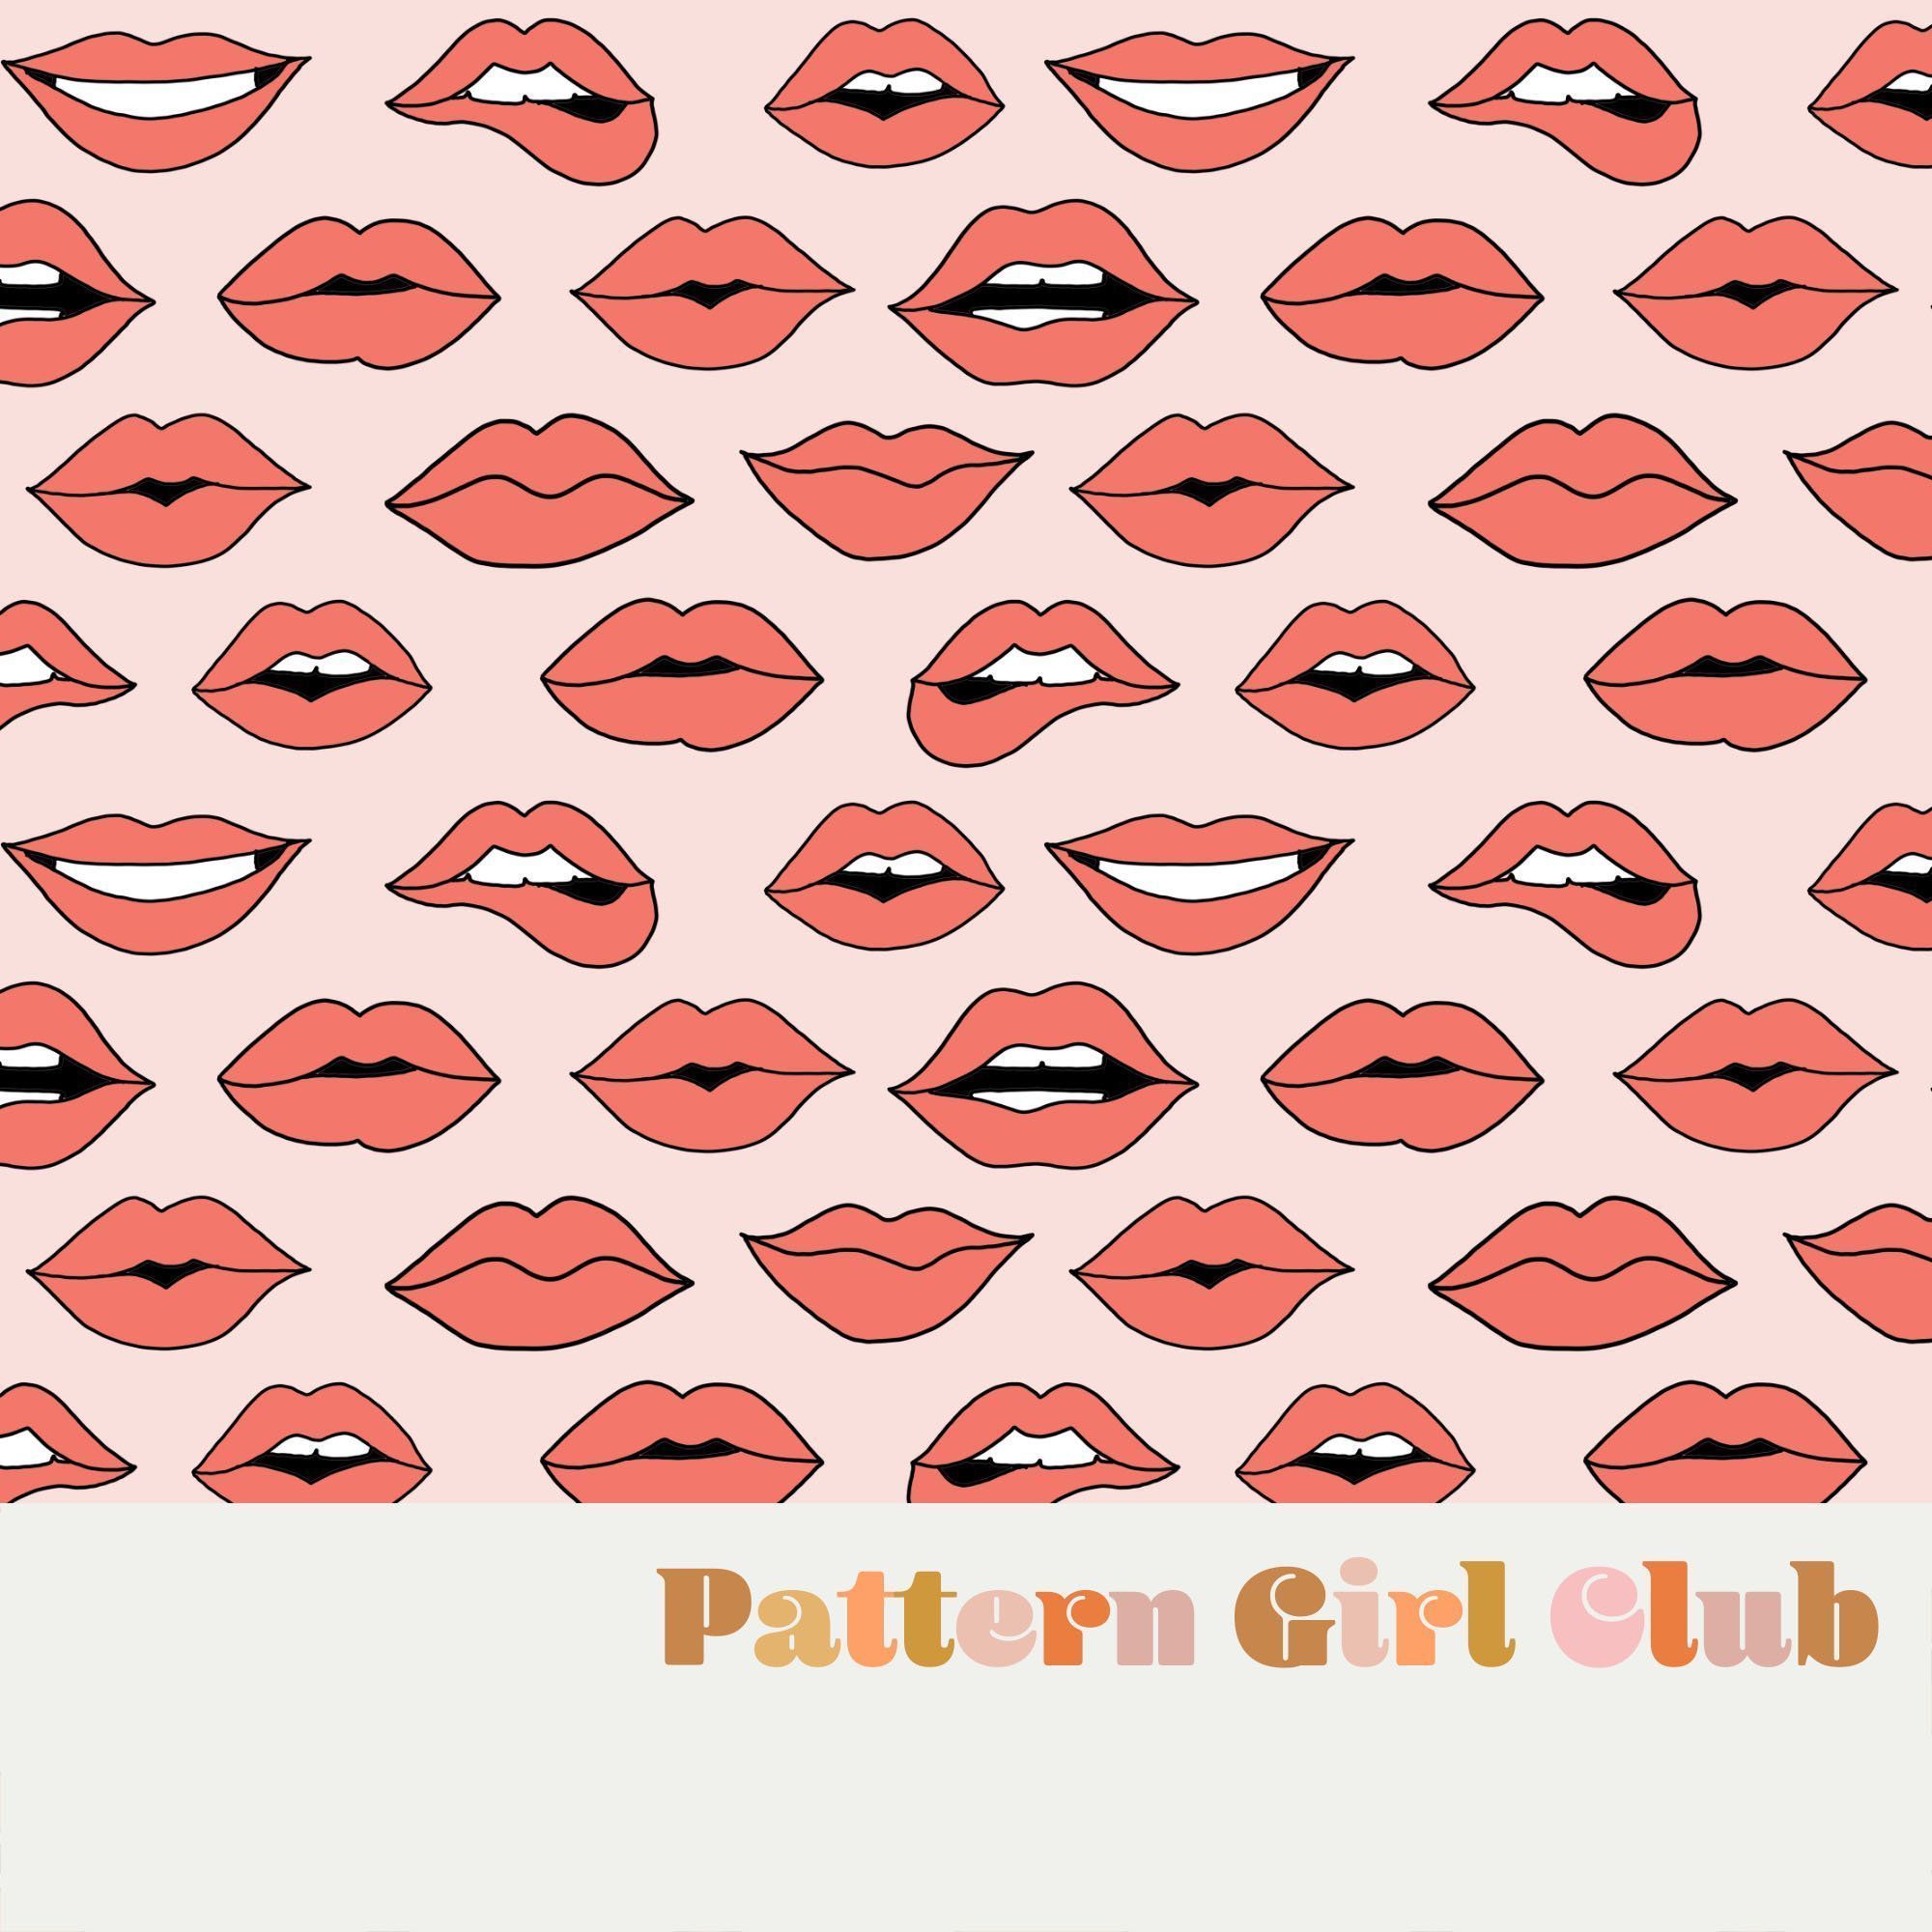 A repeating pattern of illustrated lips in shades of pink and red. - Makeup, lips